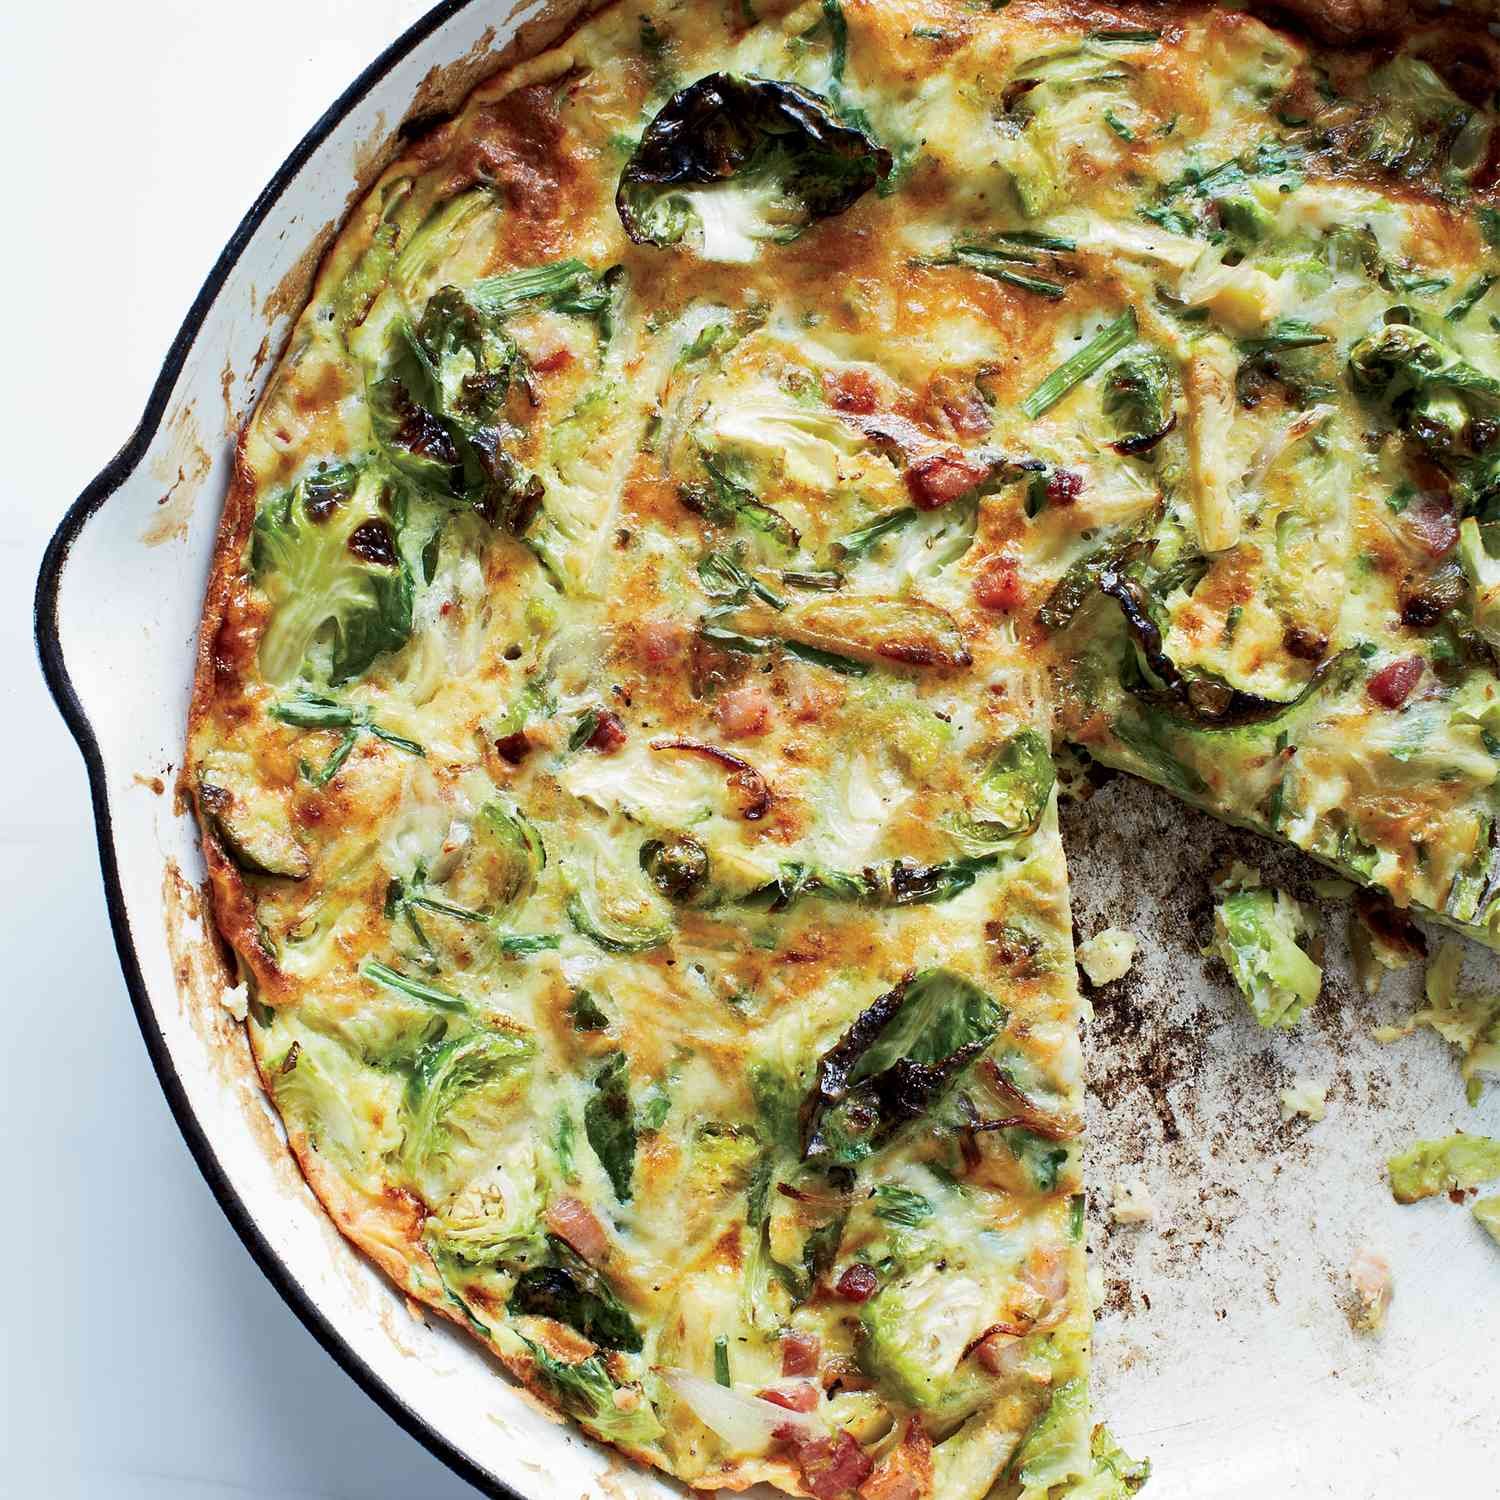 Brussels Sprout, Bacon and Gruyère Frittata